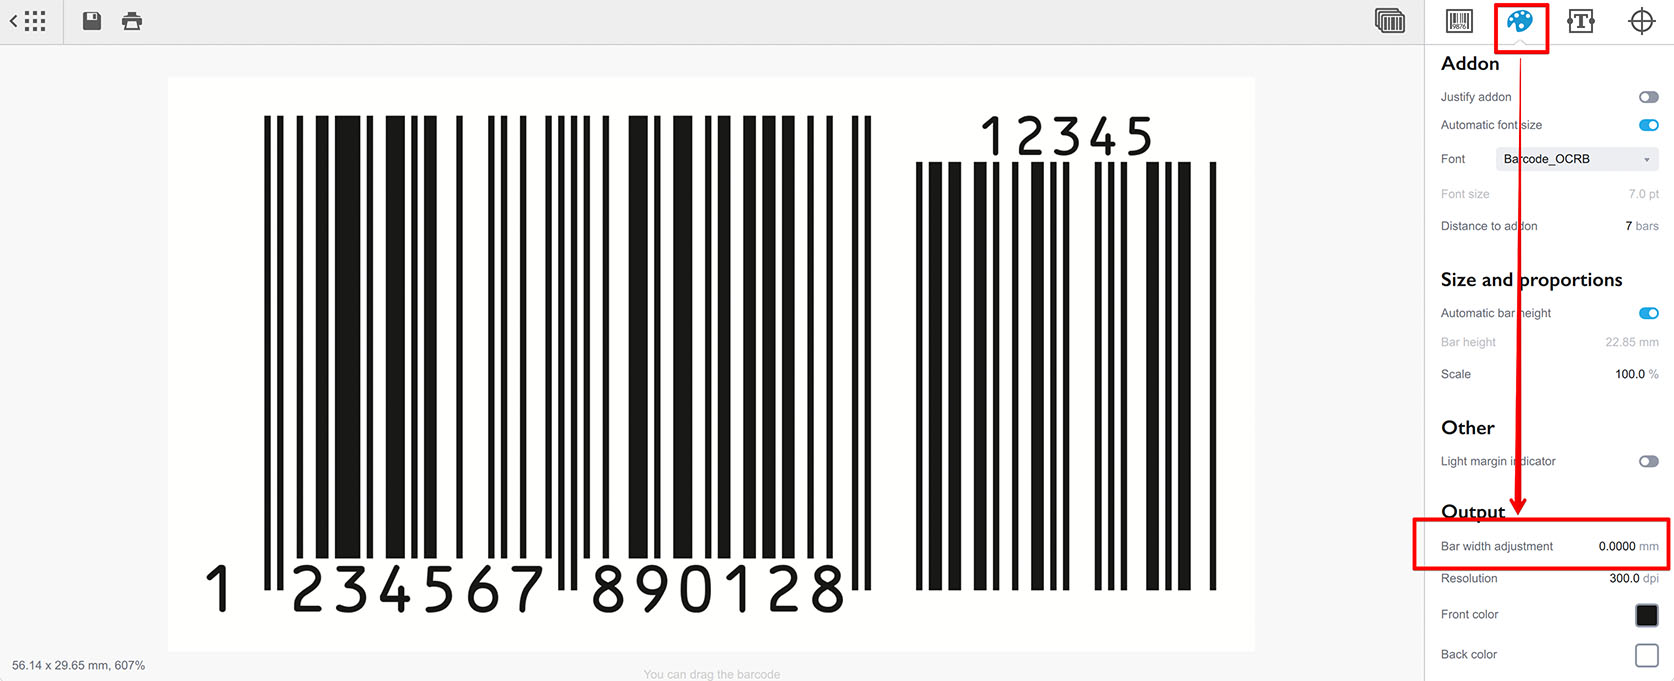 Bar width reduction parameter in Barcode